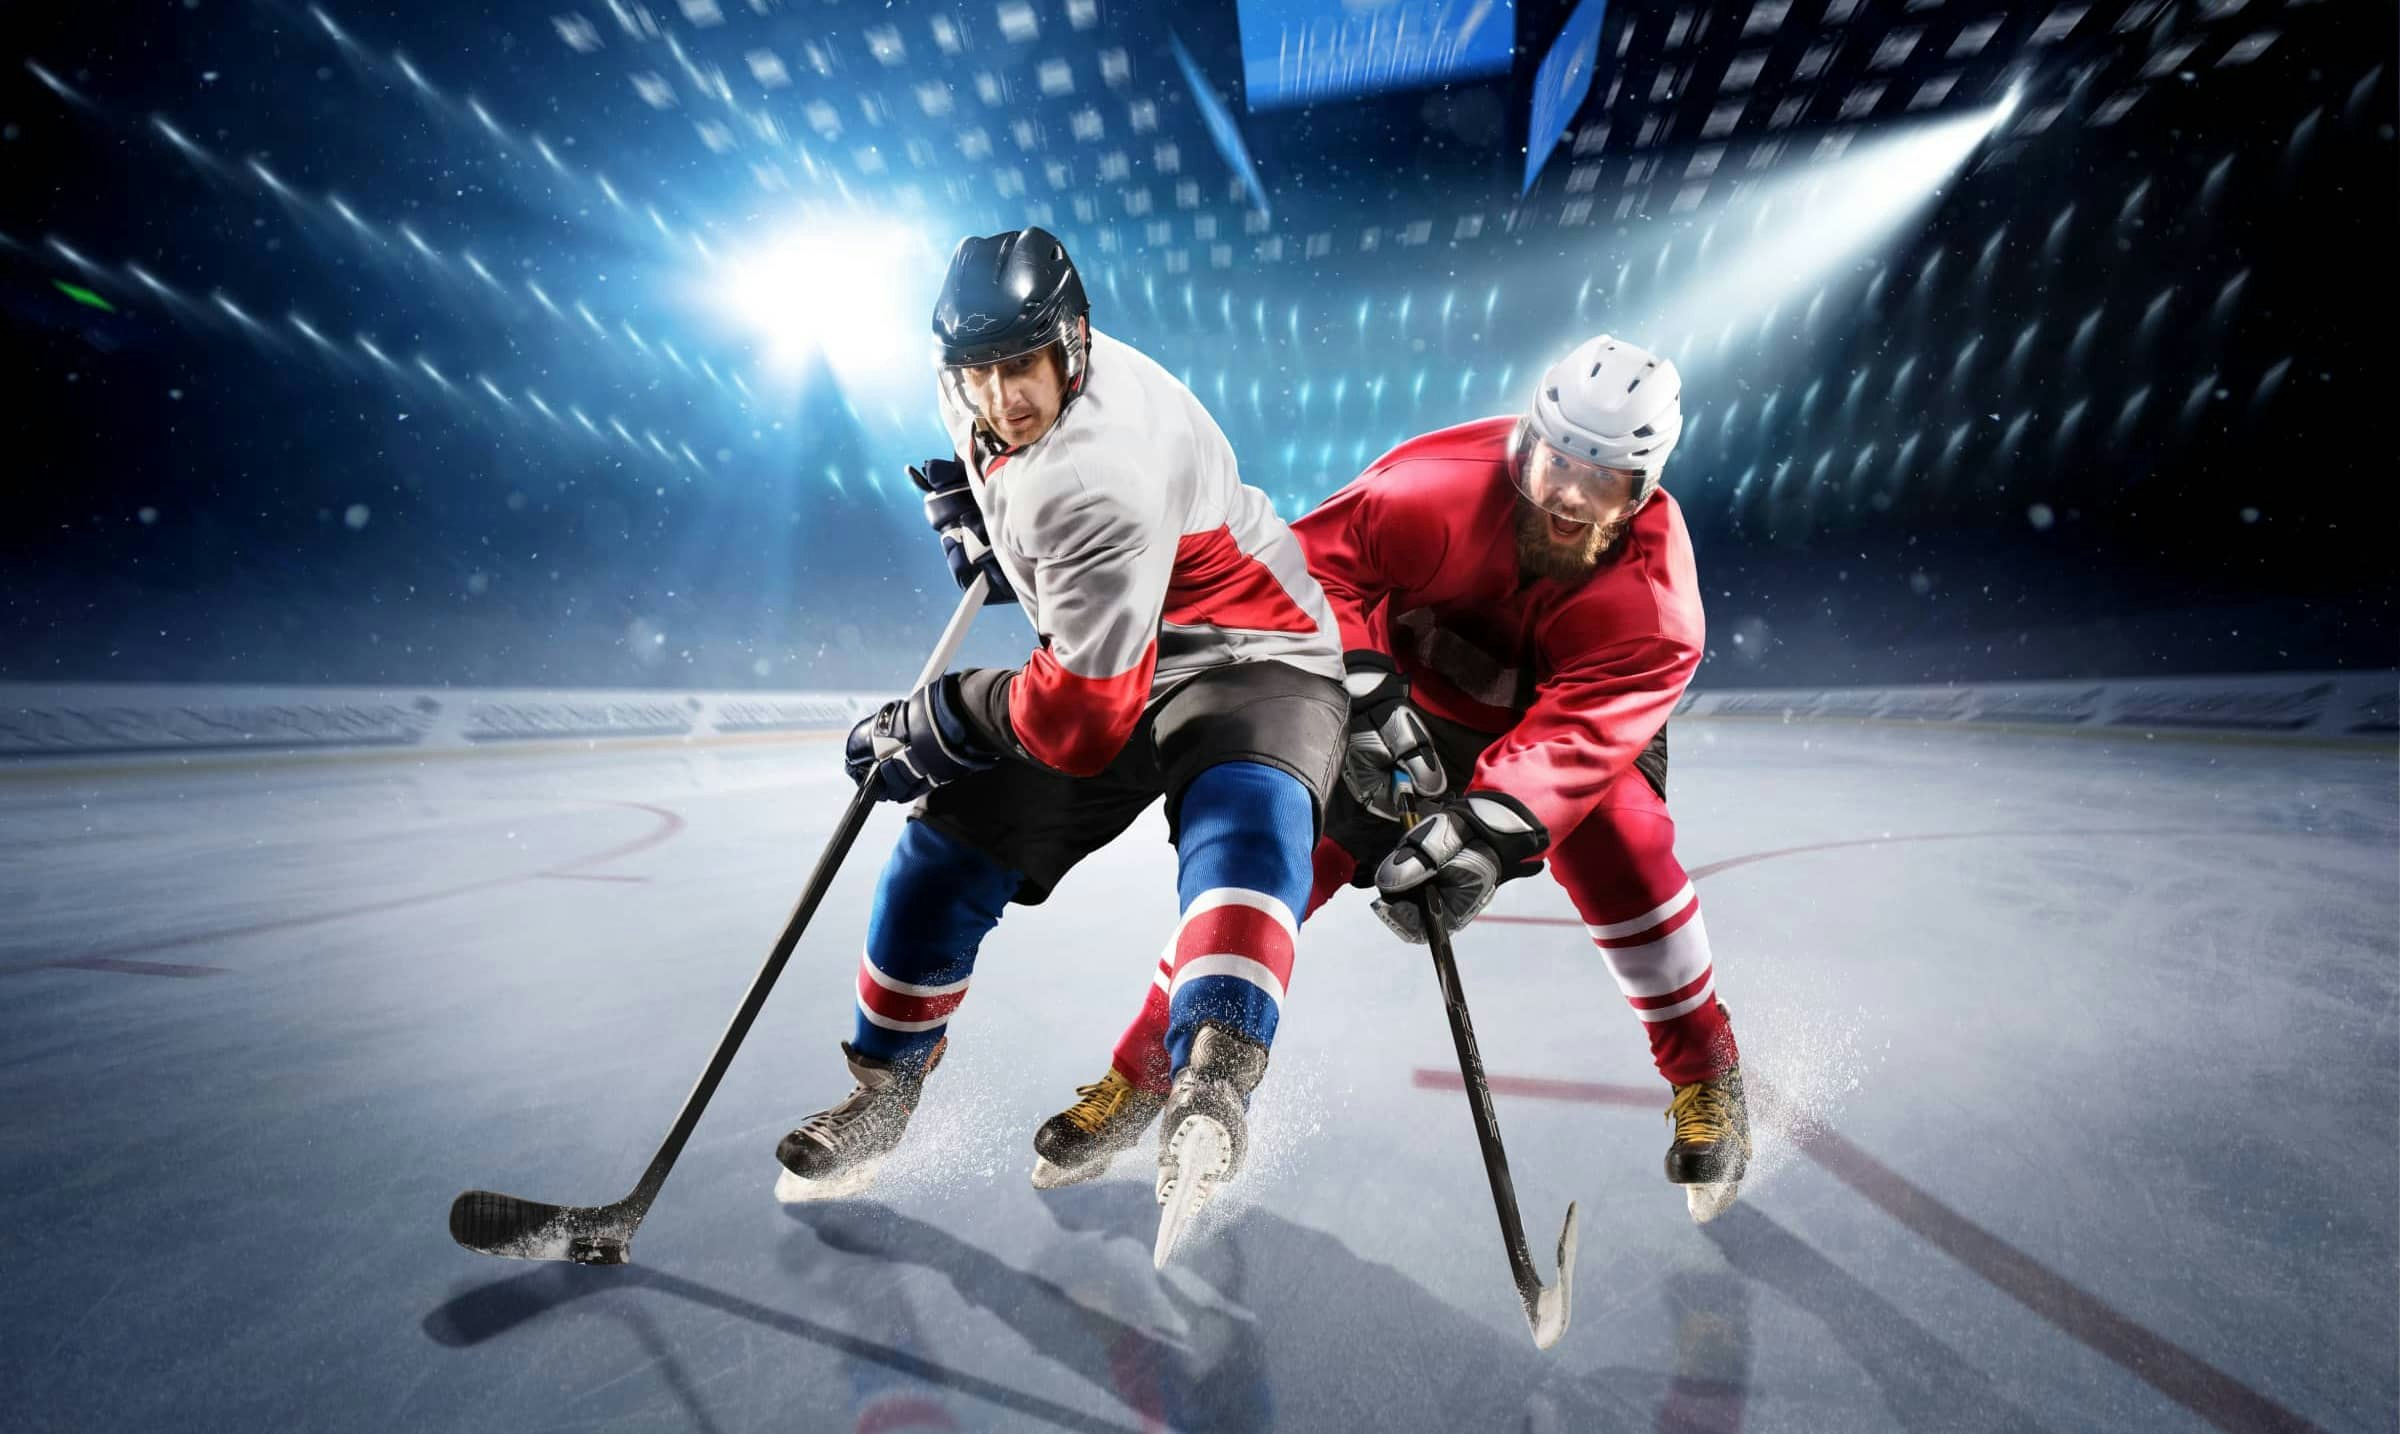 Tap into the spirit of 3ICE league with these sports-themed slots